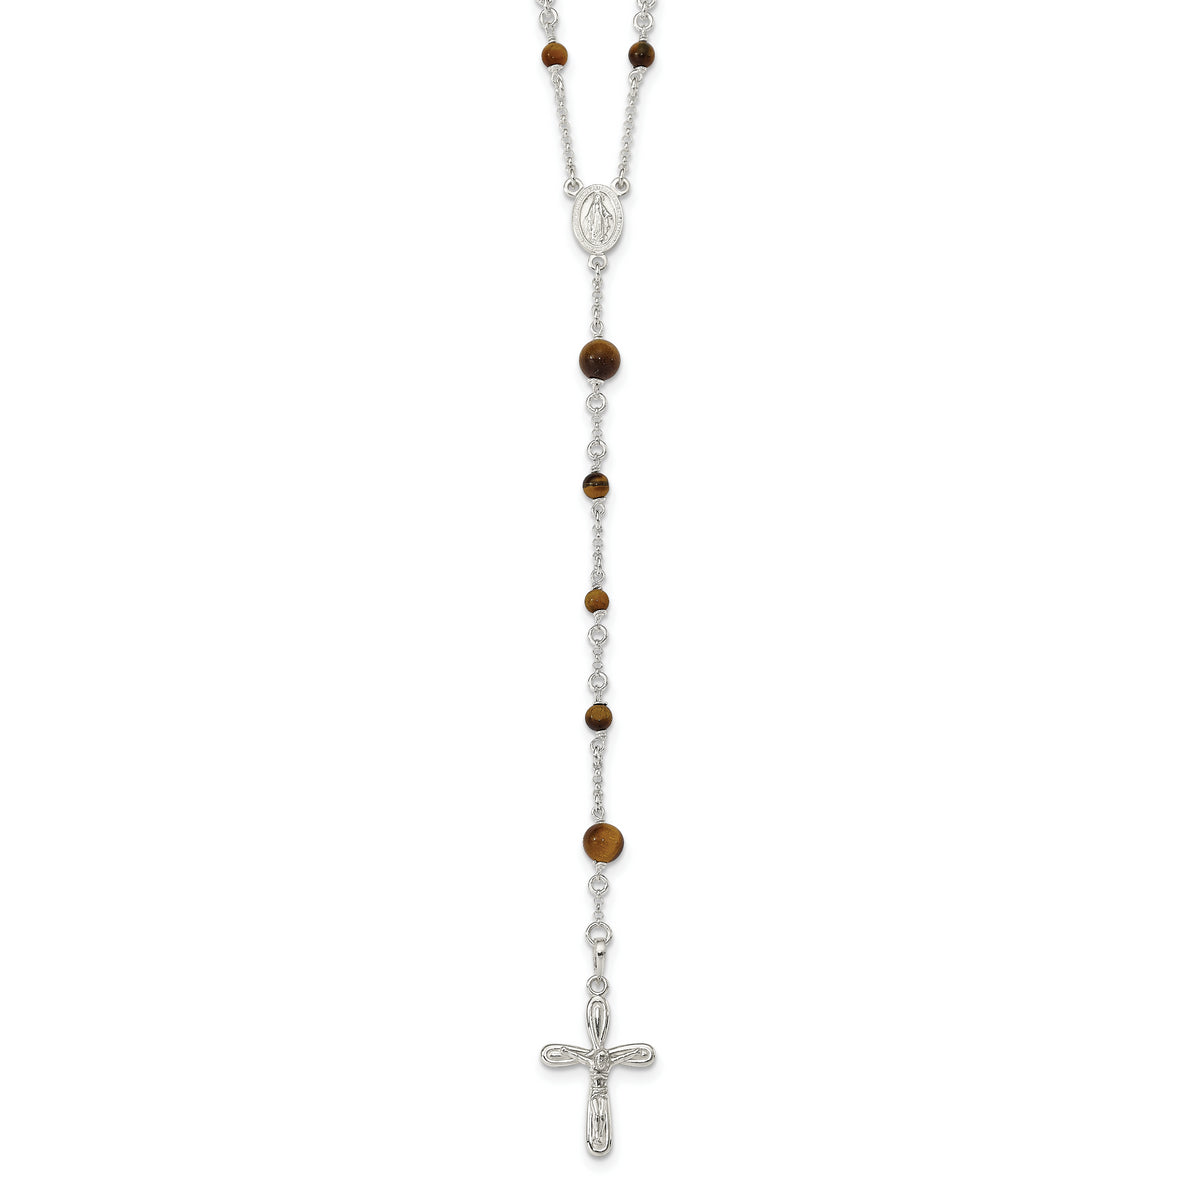 Sterling Silver Polished Tiger Eye Bead Rosary 33 inch Necklace